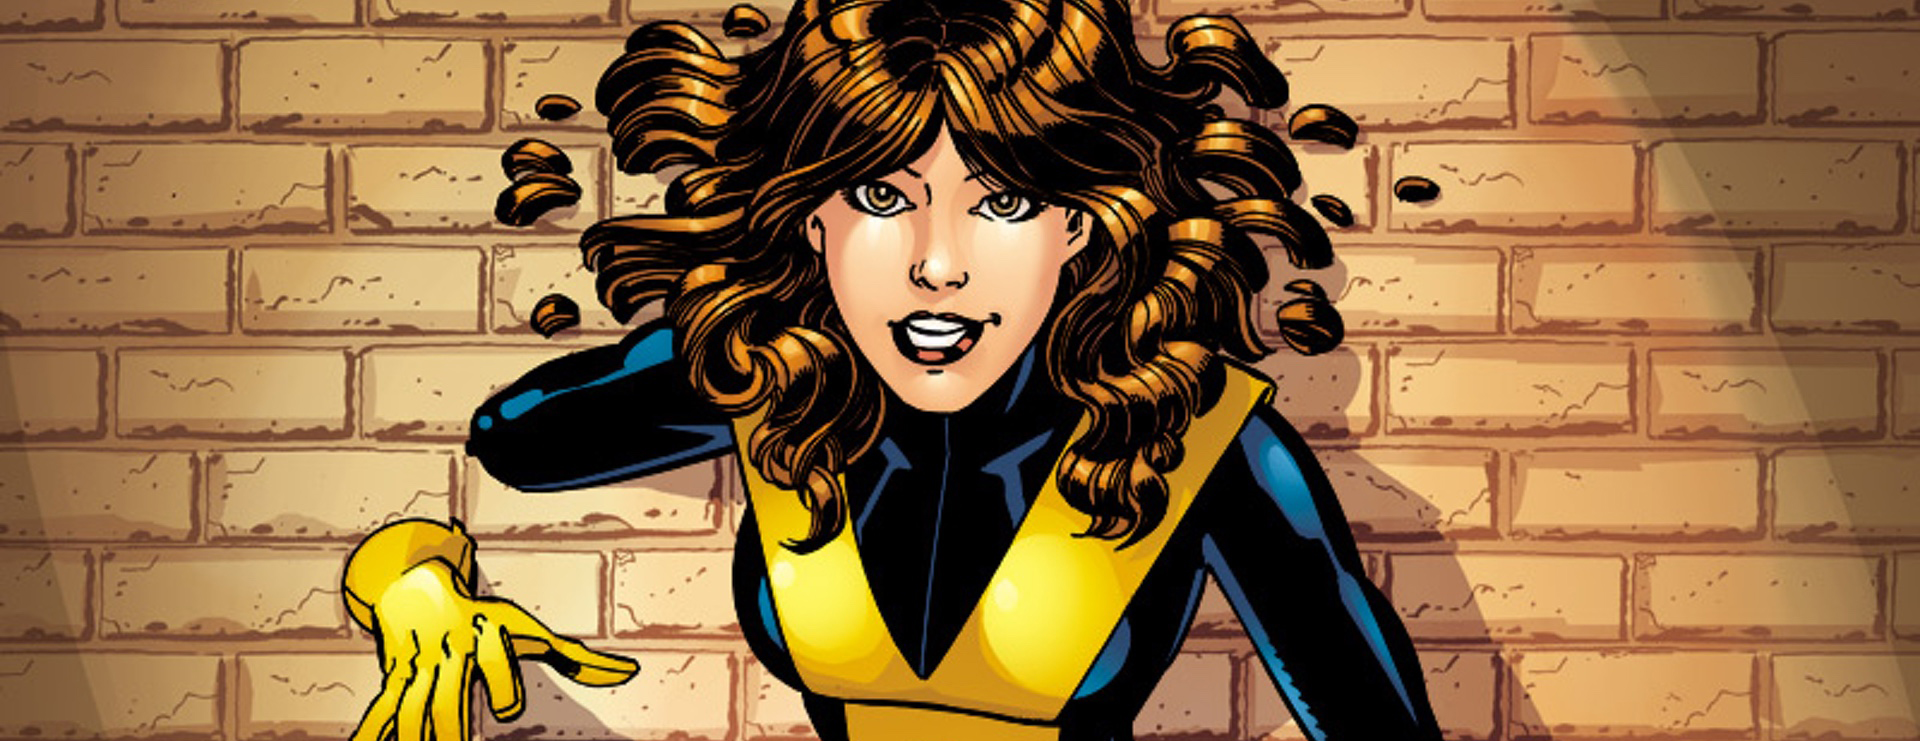 kitty-pryde